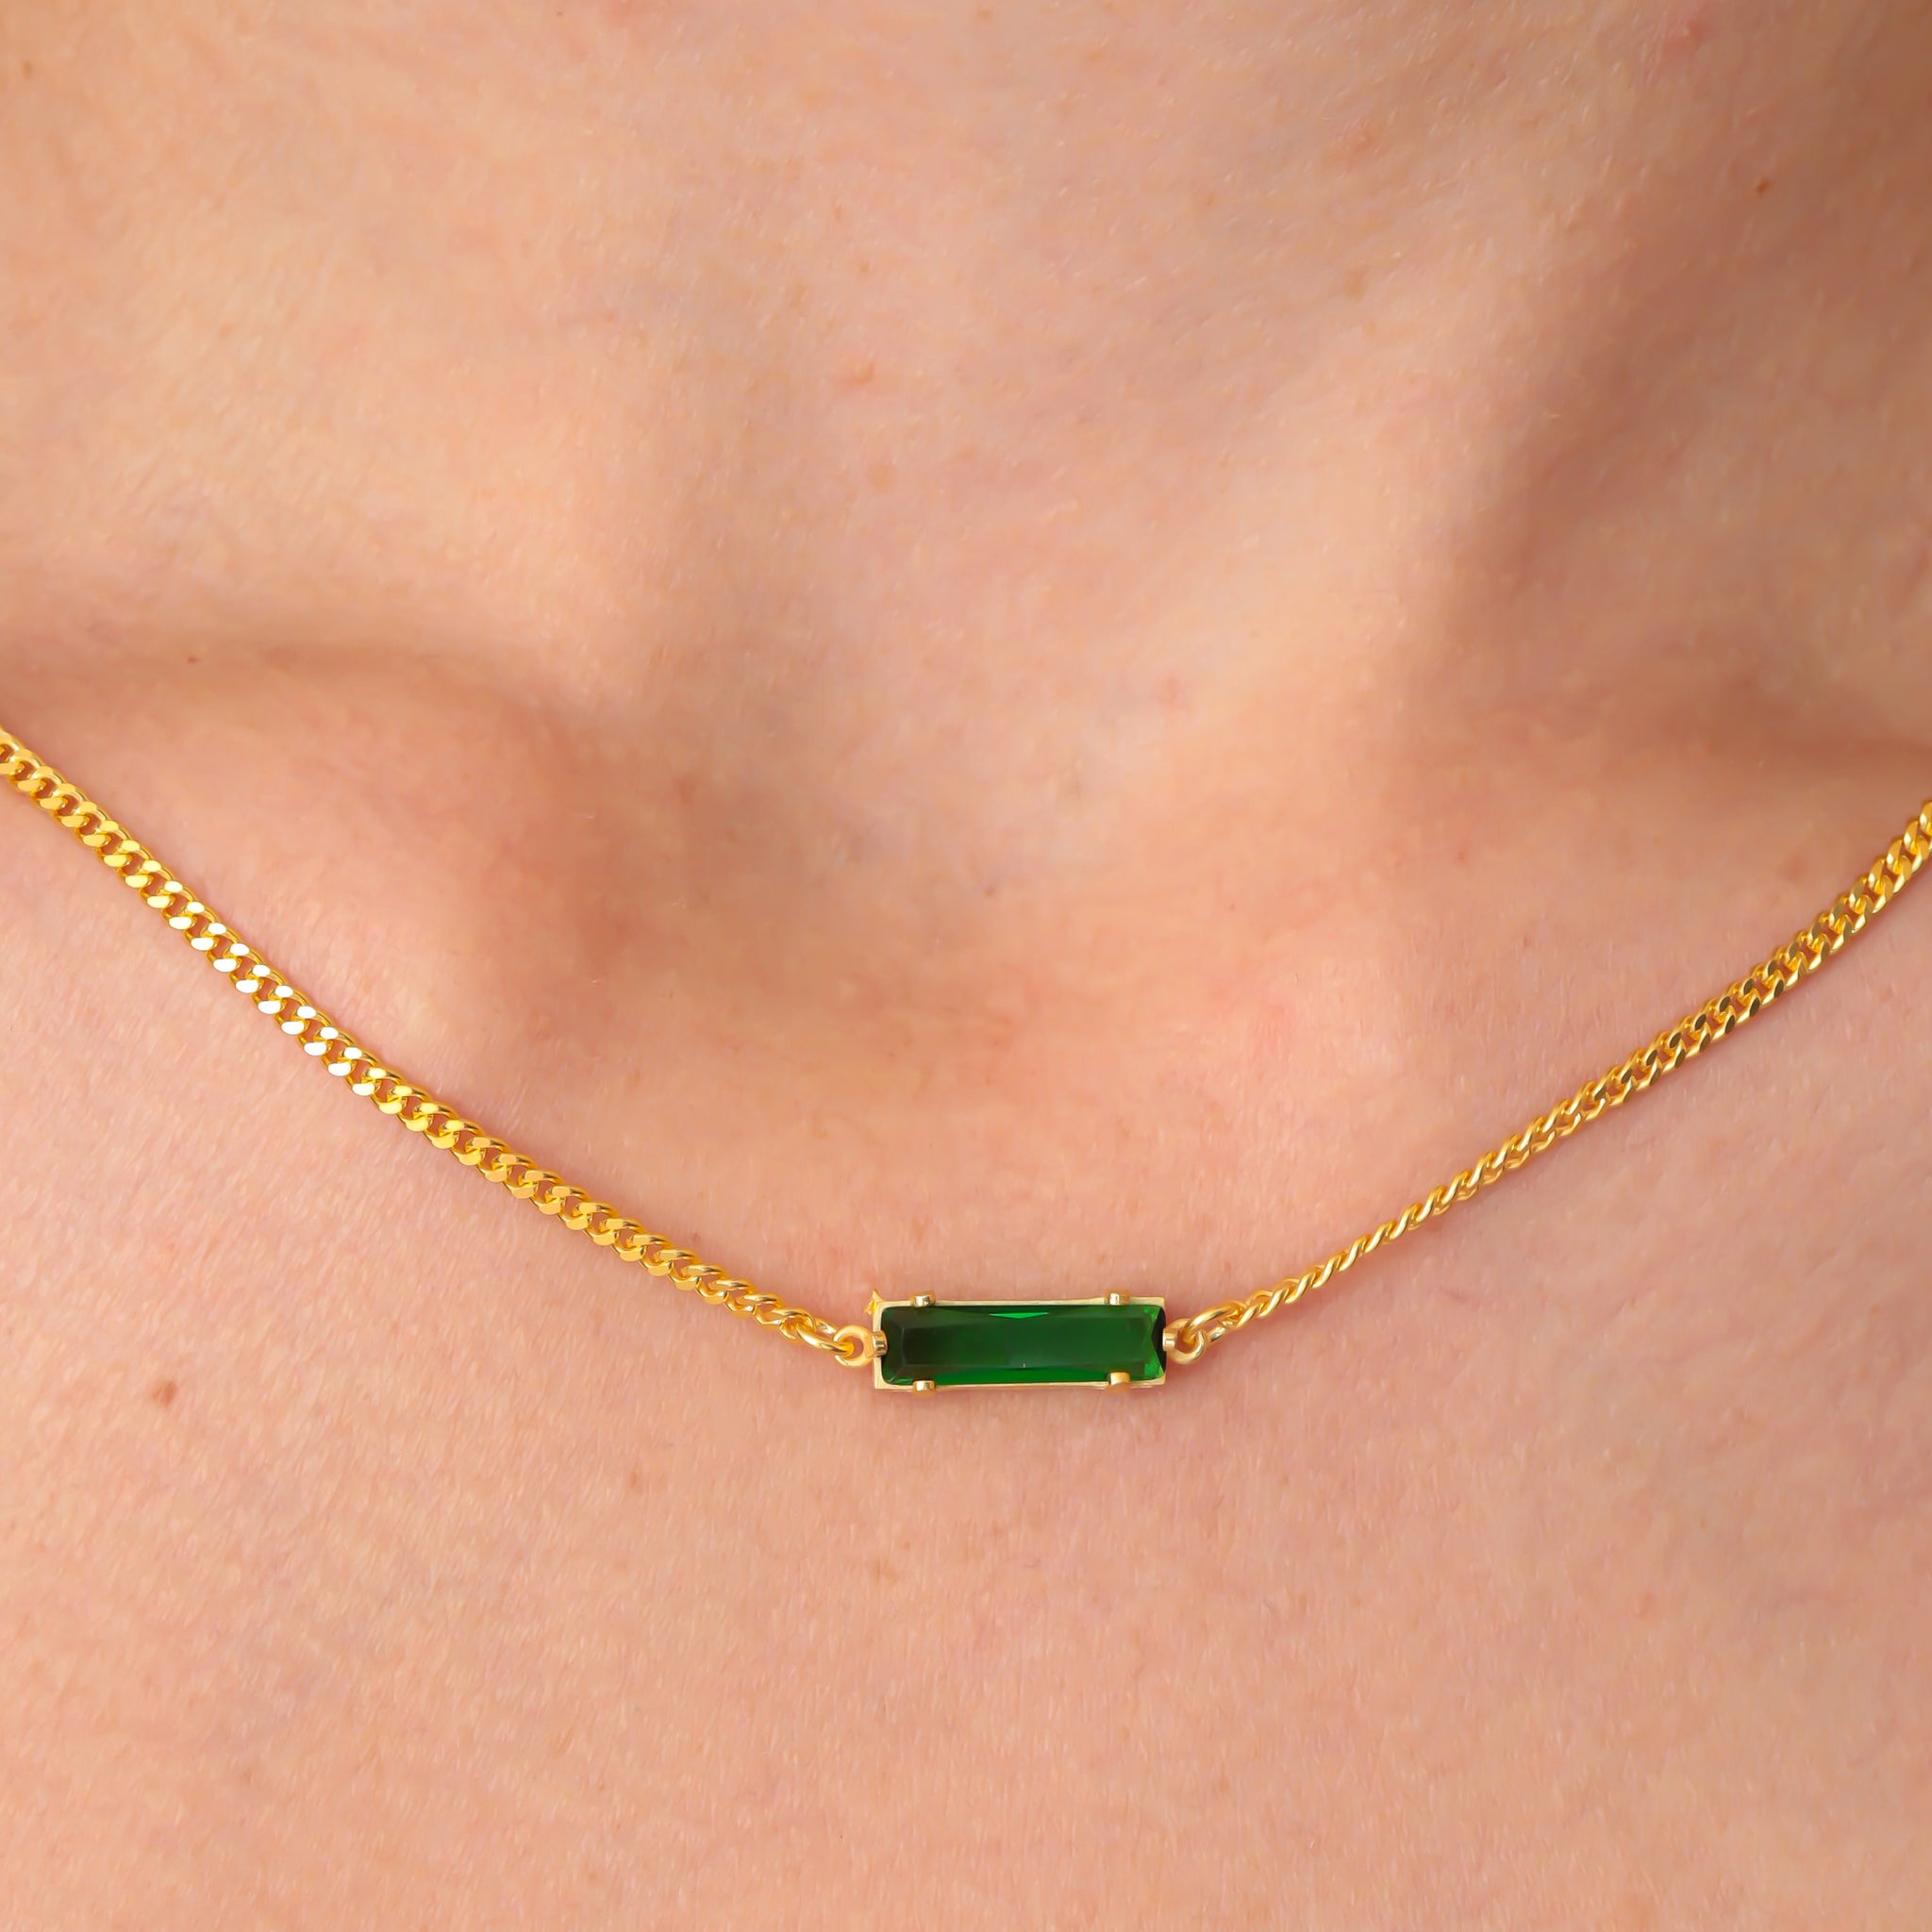 Emerald Bar Chocker Necklace Green Emerald Linked Necklace Minimalist Emerald Choker Necklace Thick Chain Emerald Necklace Gift For Her